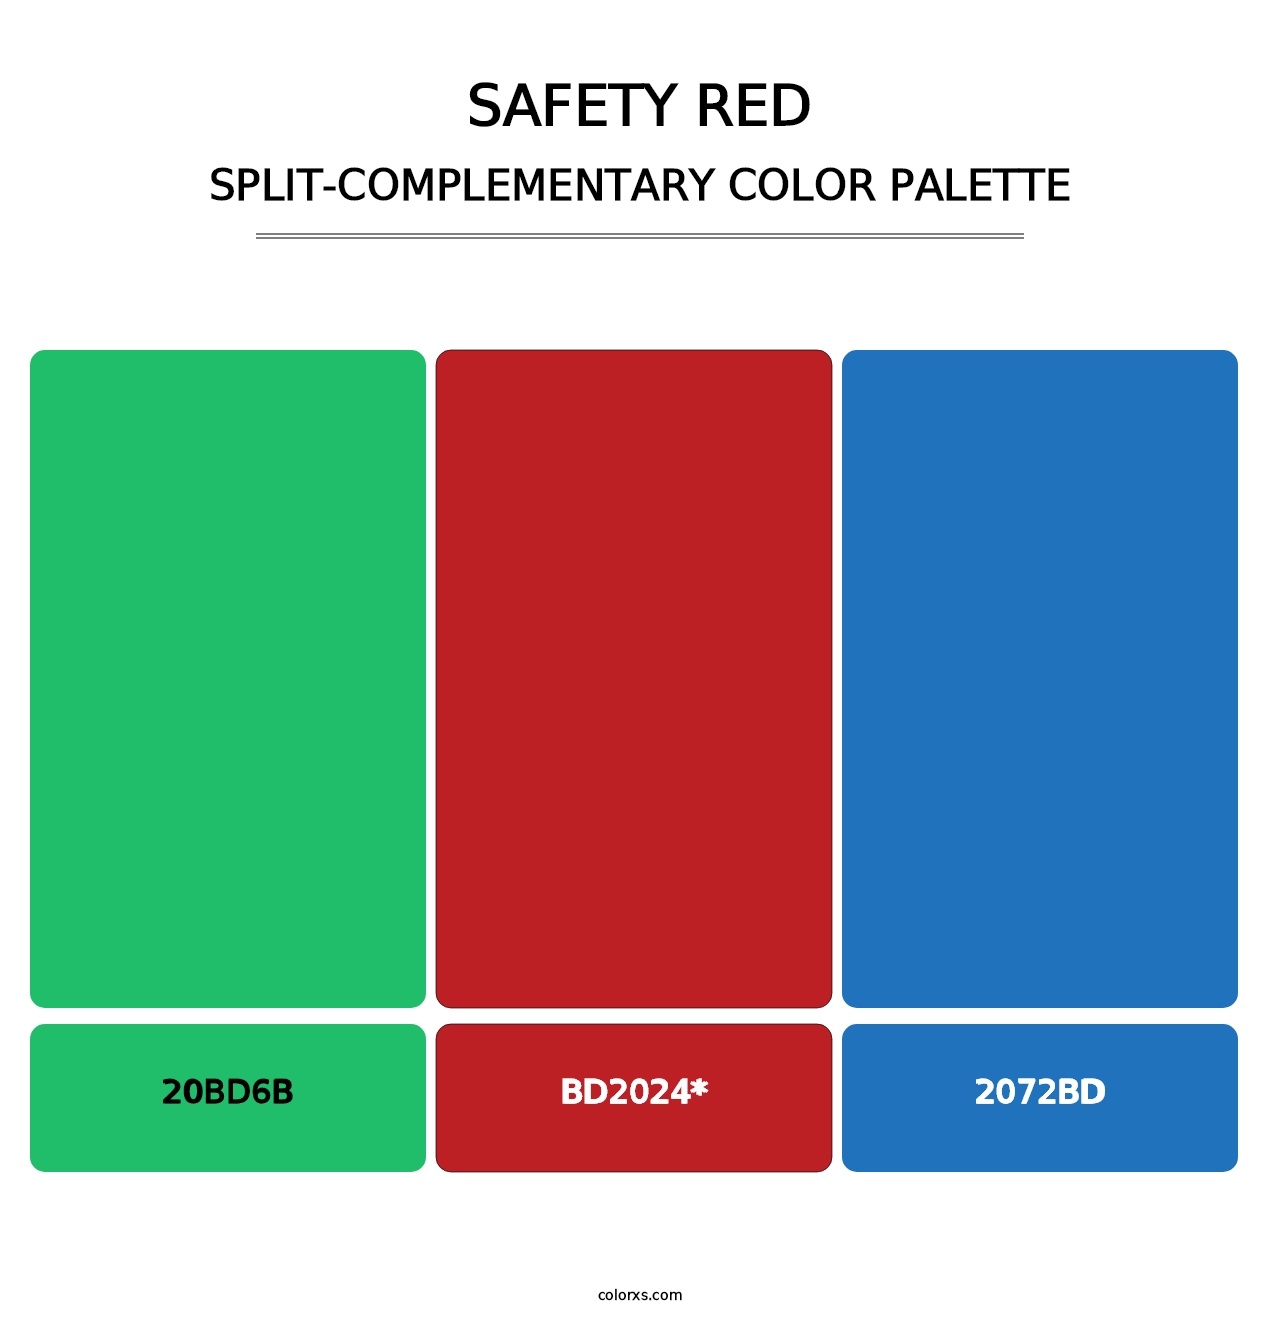 Safety Red - Split-Complementary Color Palette